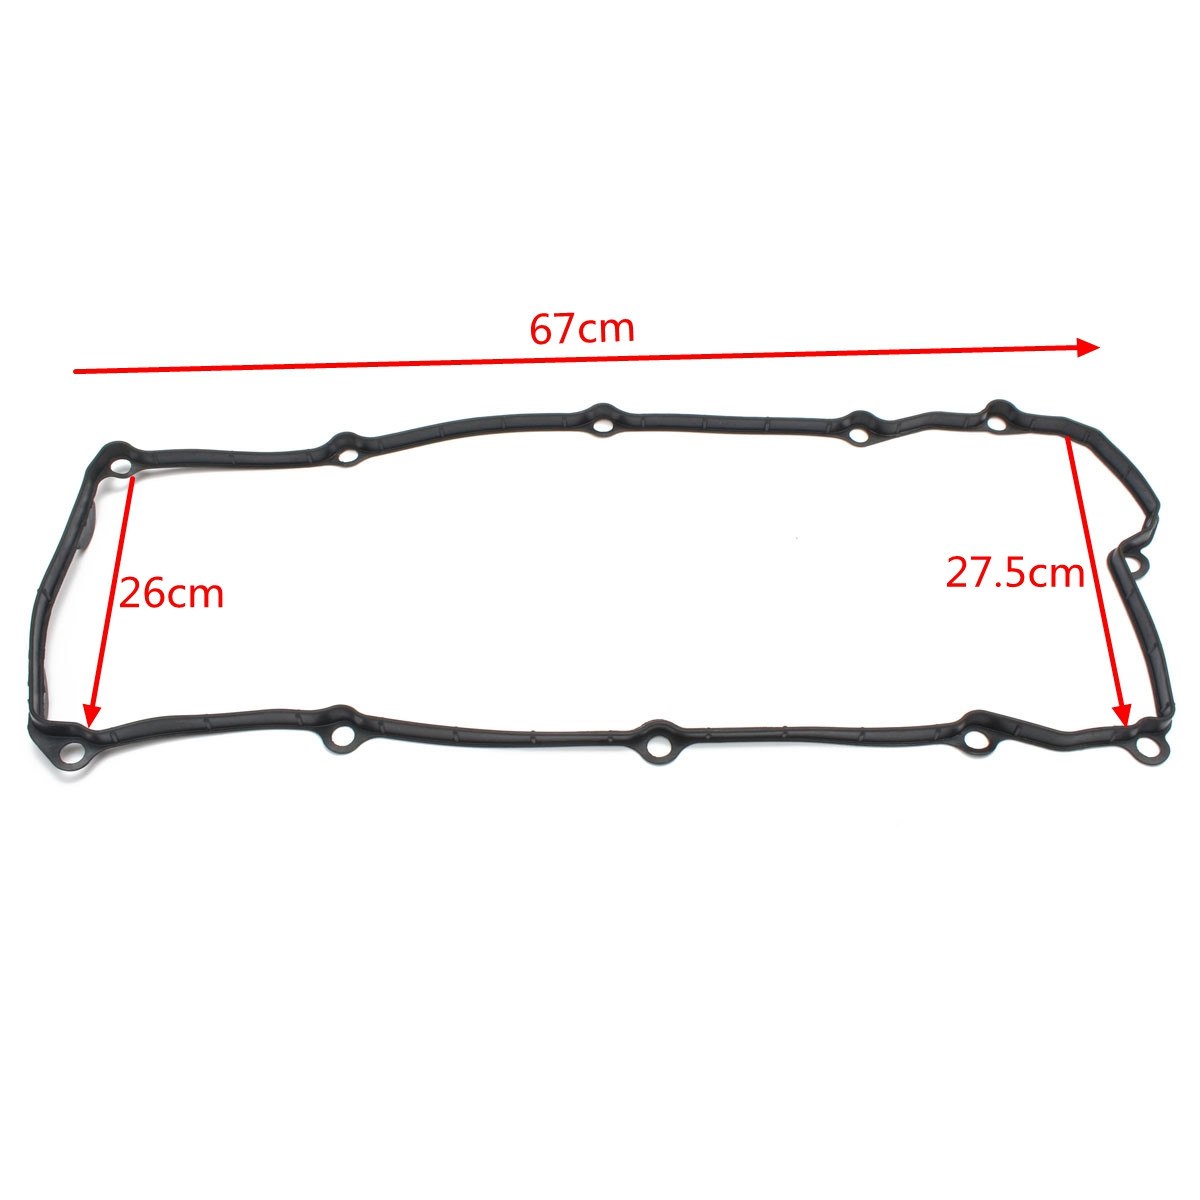 Genuine ELRING Valve Cover Gasket Set Suit For BMW E36 E39 Z3 M52 S52 1996-2000 11120034108 302350 302.350 + grommets or 318.580 Gasket and Oil Filter Valve Cover Set For BMW 325 328 330 525 528 X5 1999-2002  11120034108